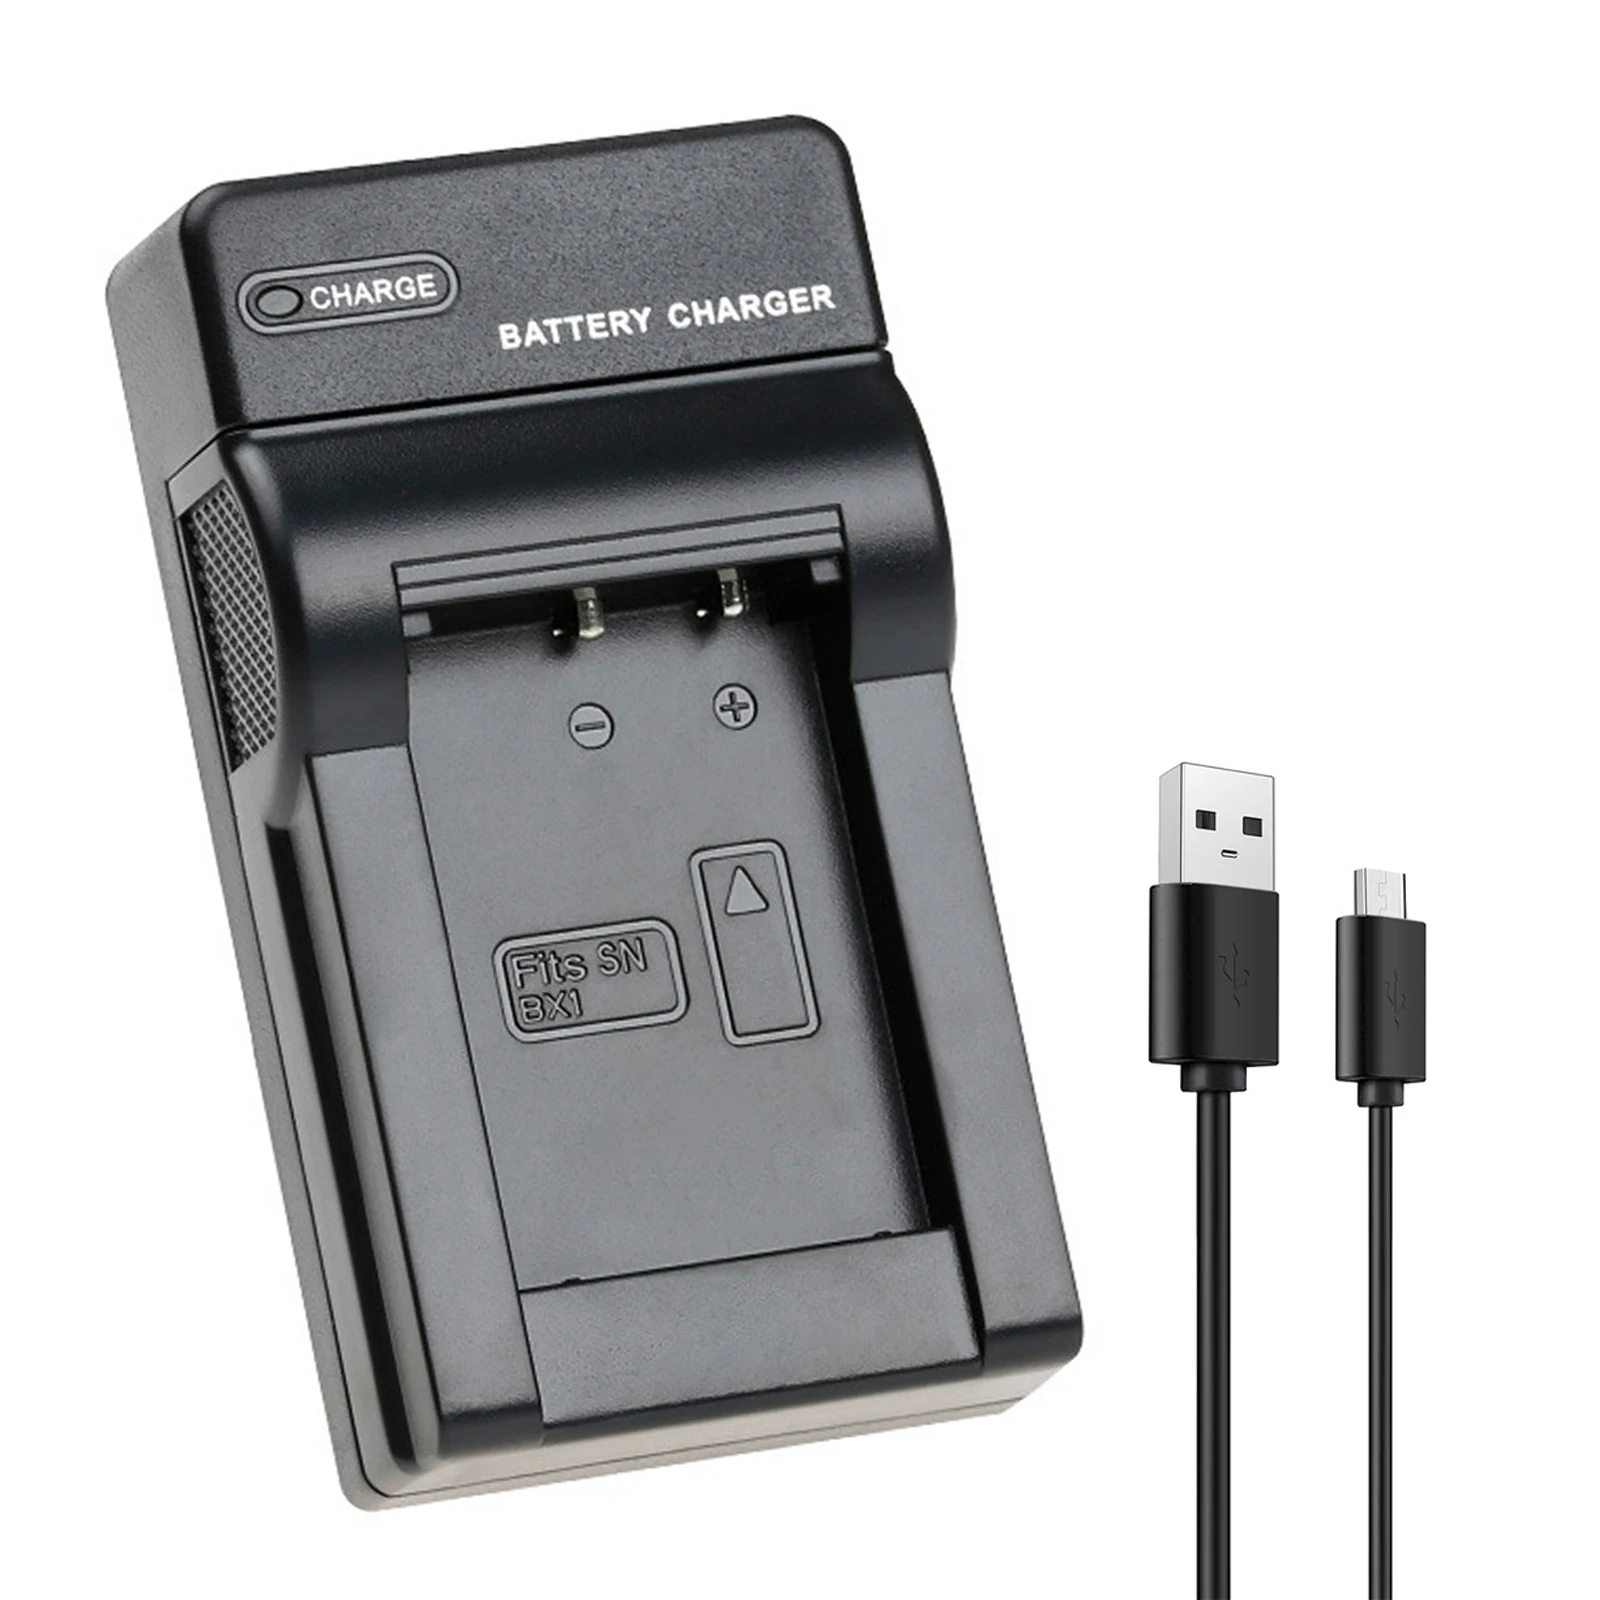 

NP-BX1 NPBX1 Battery Charger for Sony Cyber-Shot DSC-HX300, DSC-HX50, DSC-HX50V/ B, DSC-HX50VB, DSC-HX60V, DSC-HX90, DSC-HX90V